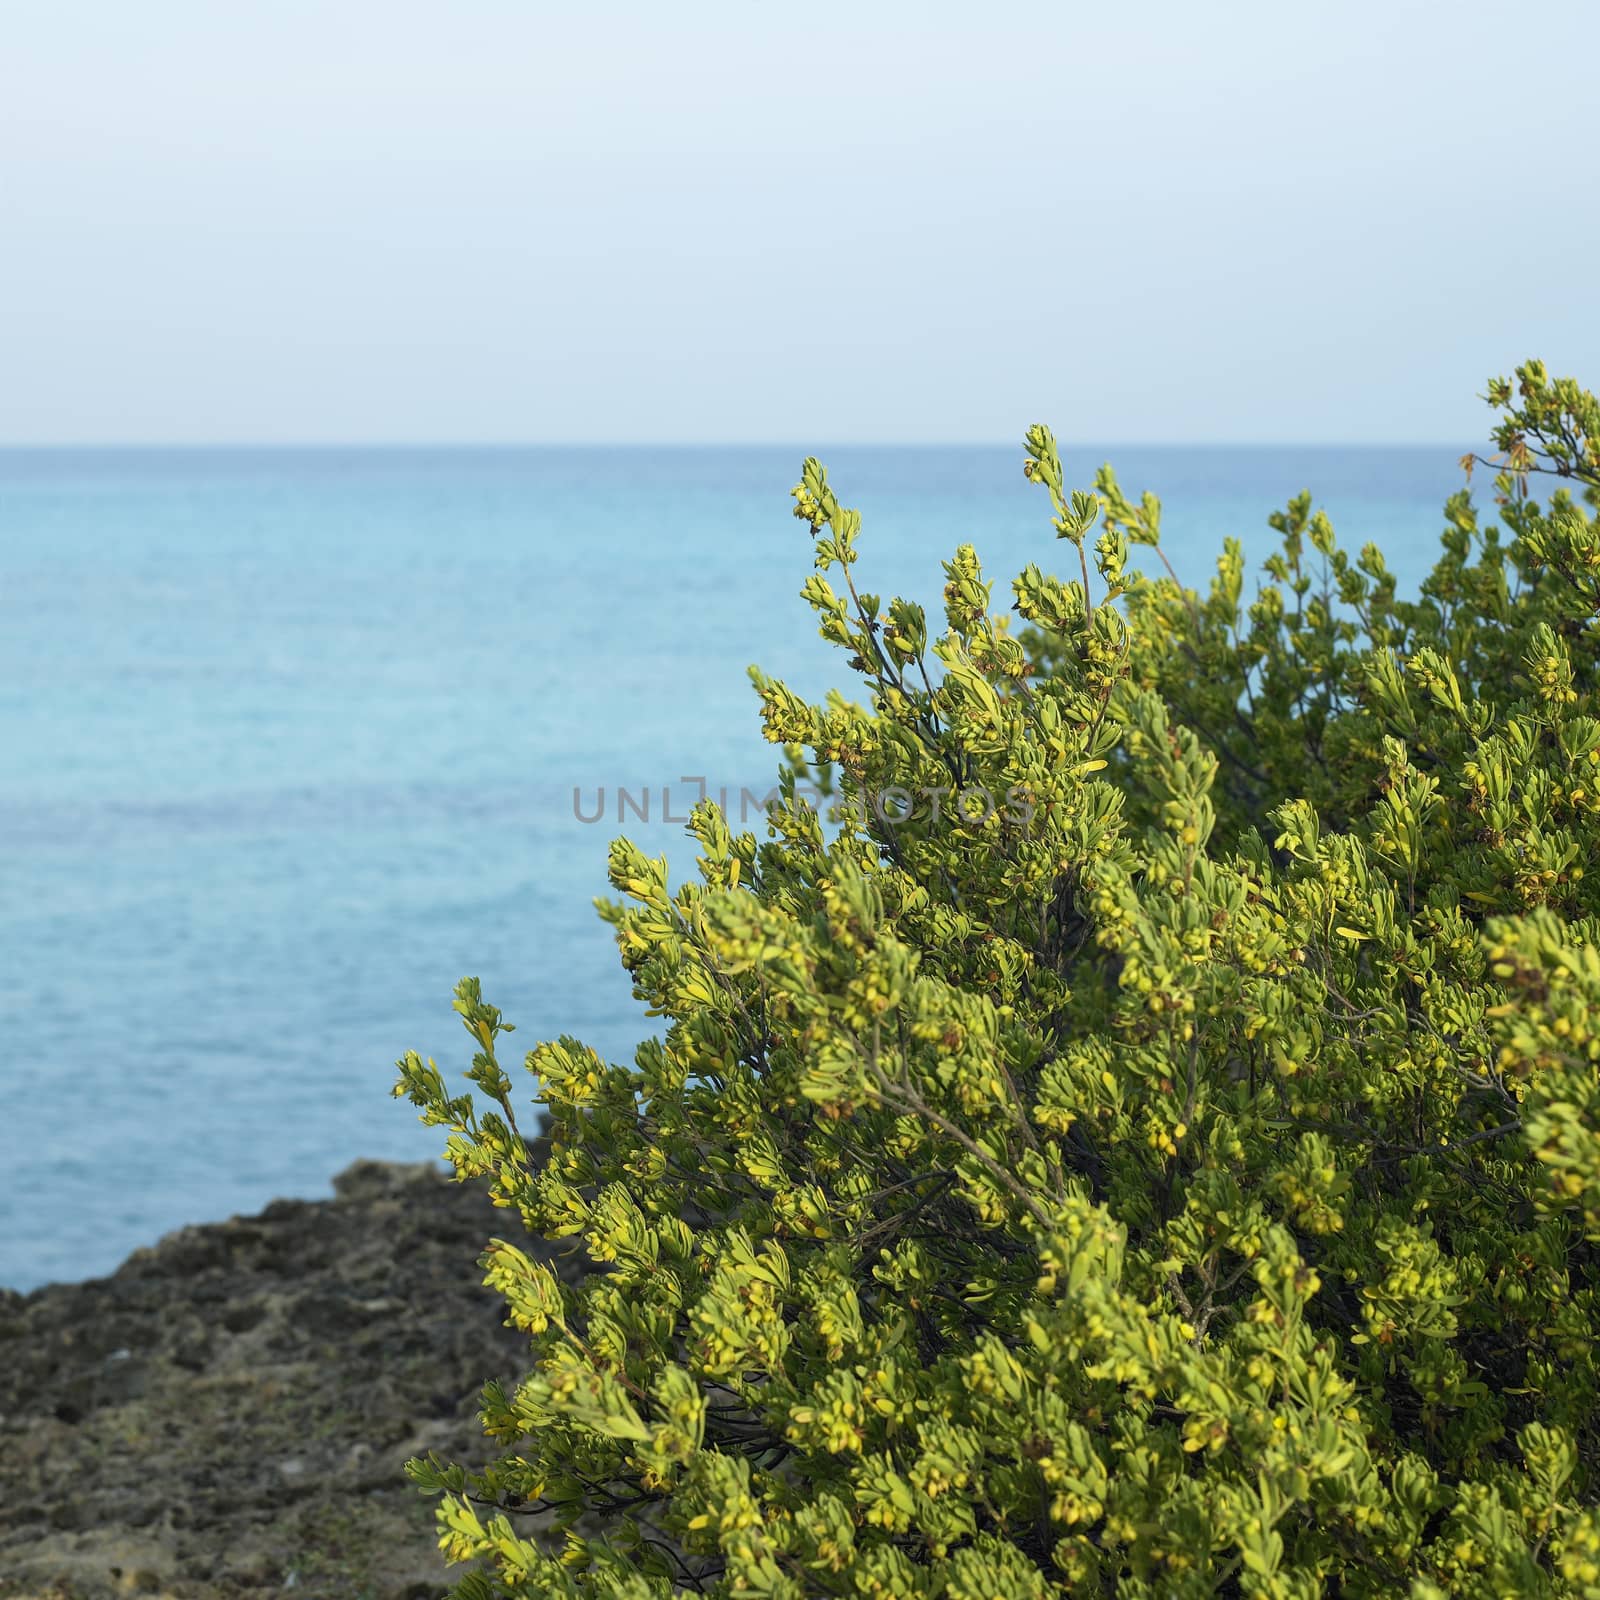 Green bushes on a cliff with blue ocean